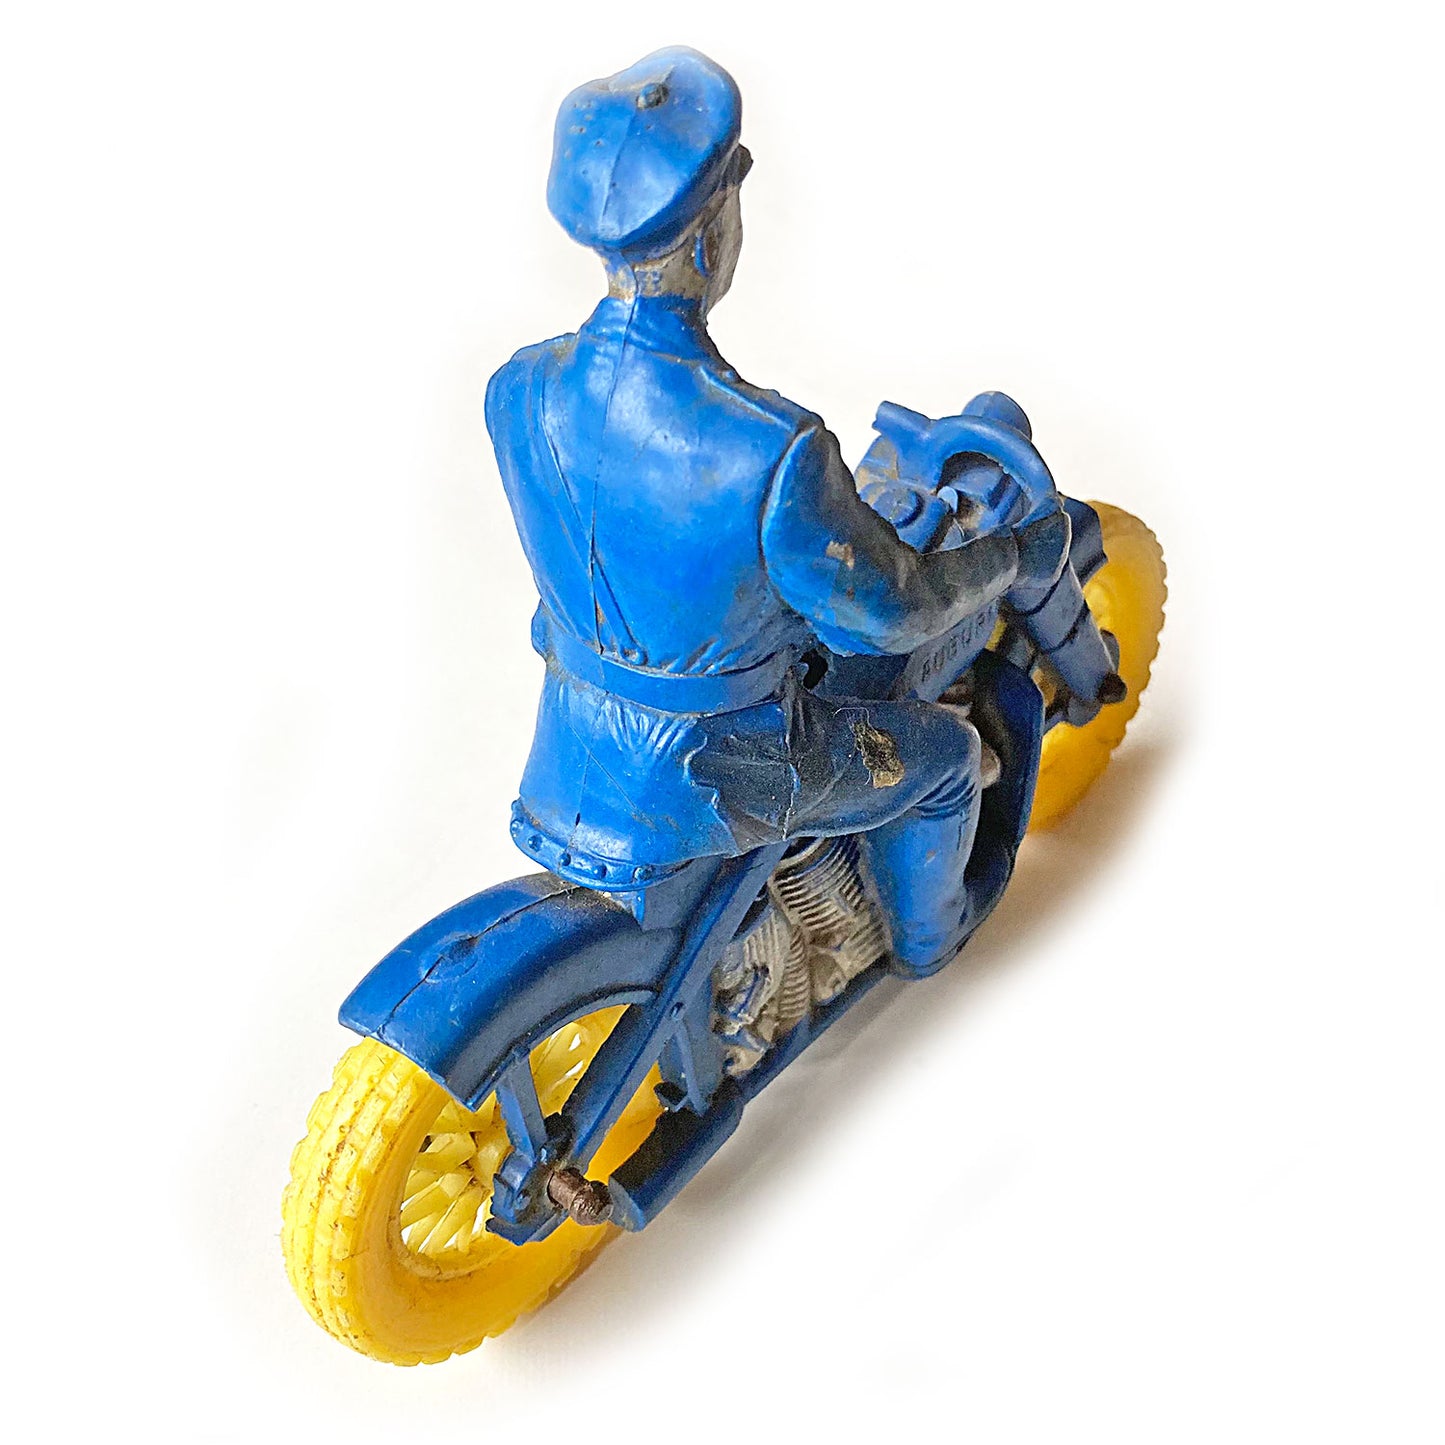 Auburn v-twin motorcycle toy, cop on Harley or Indian, rubber and plastic, 1940s